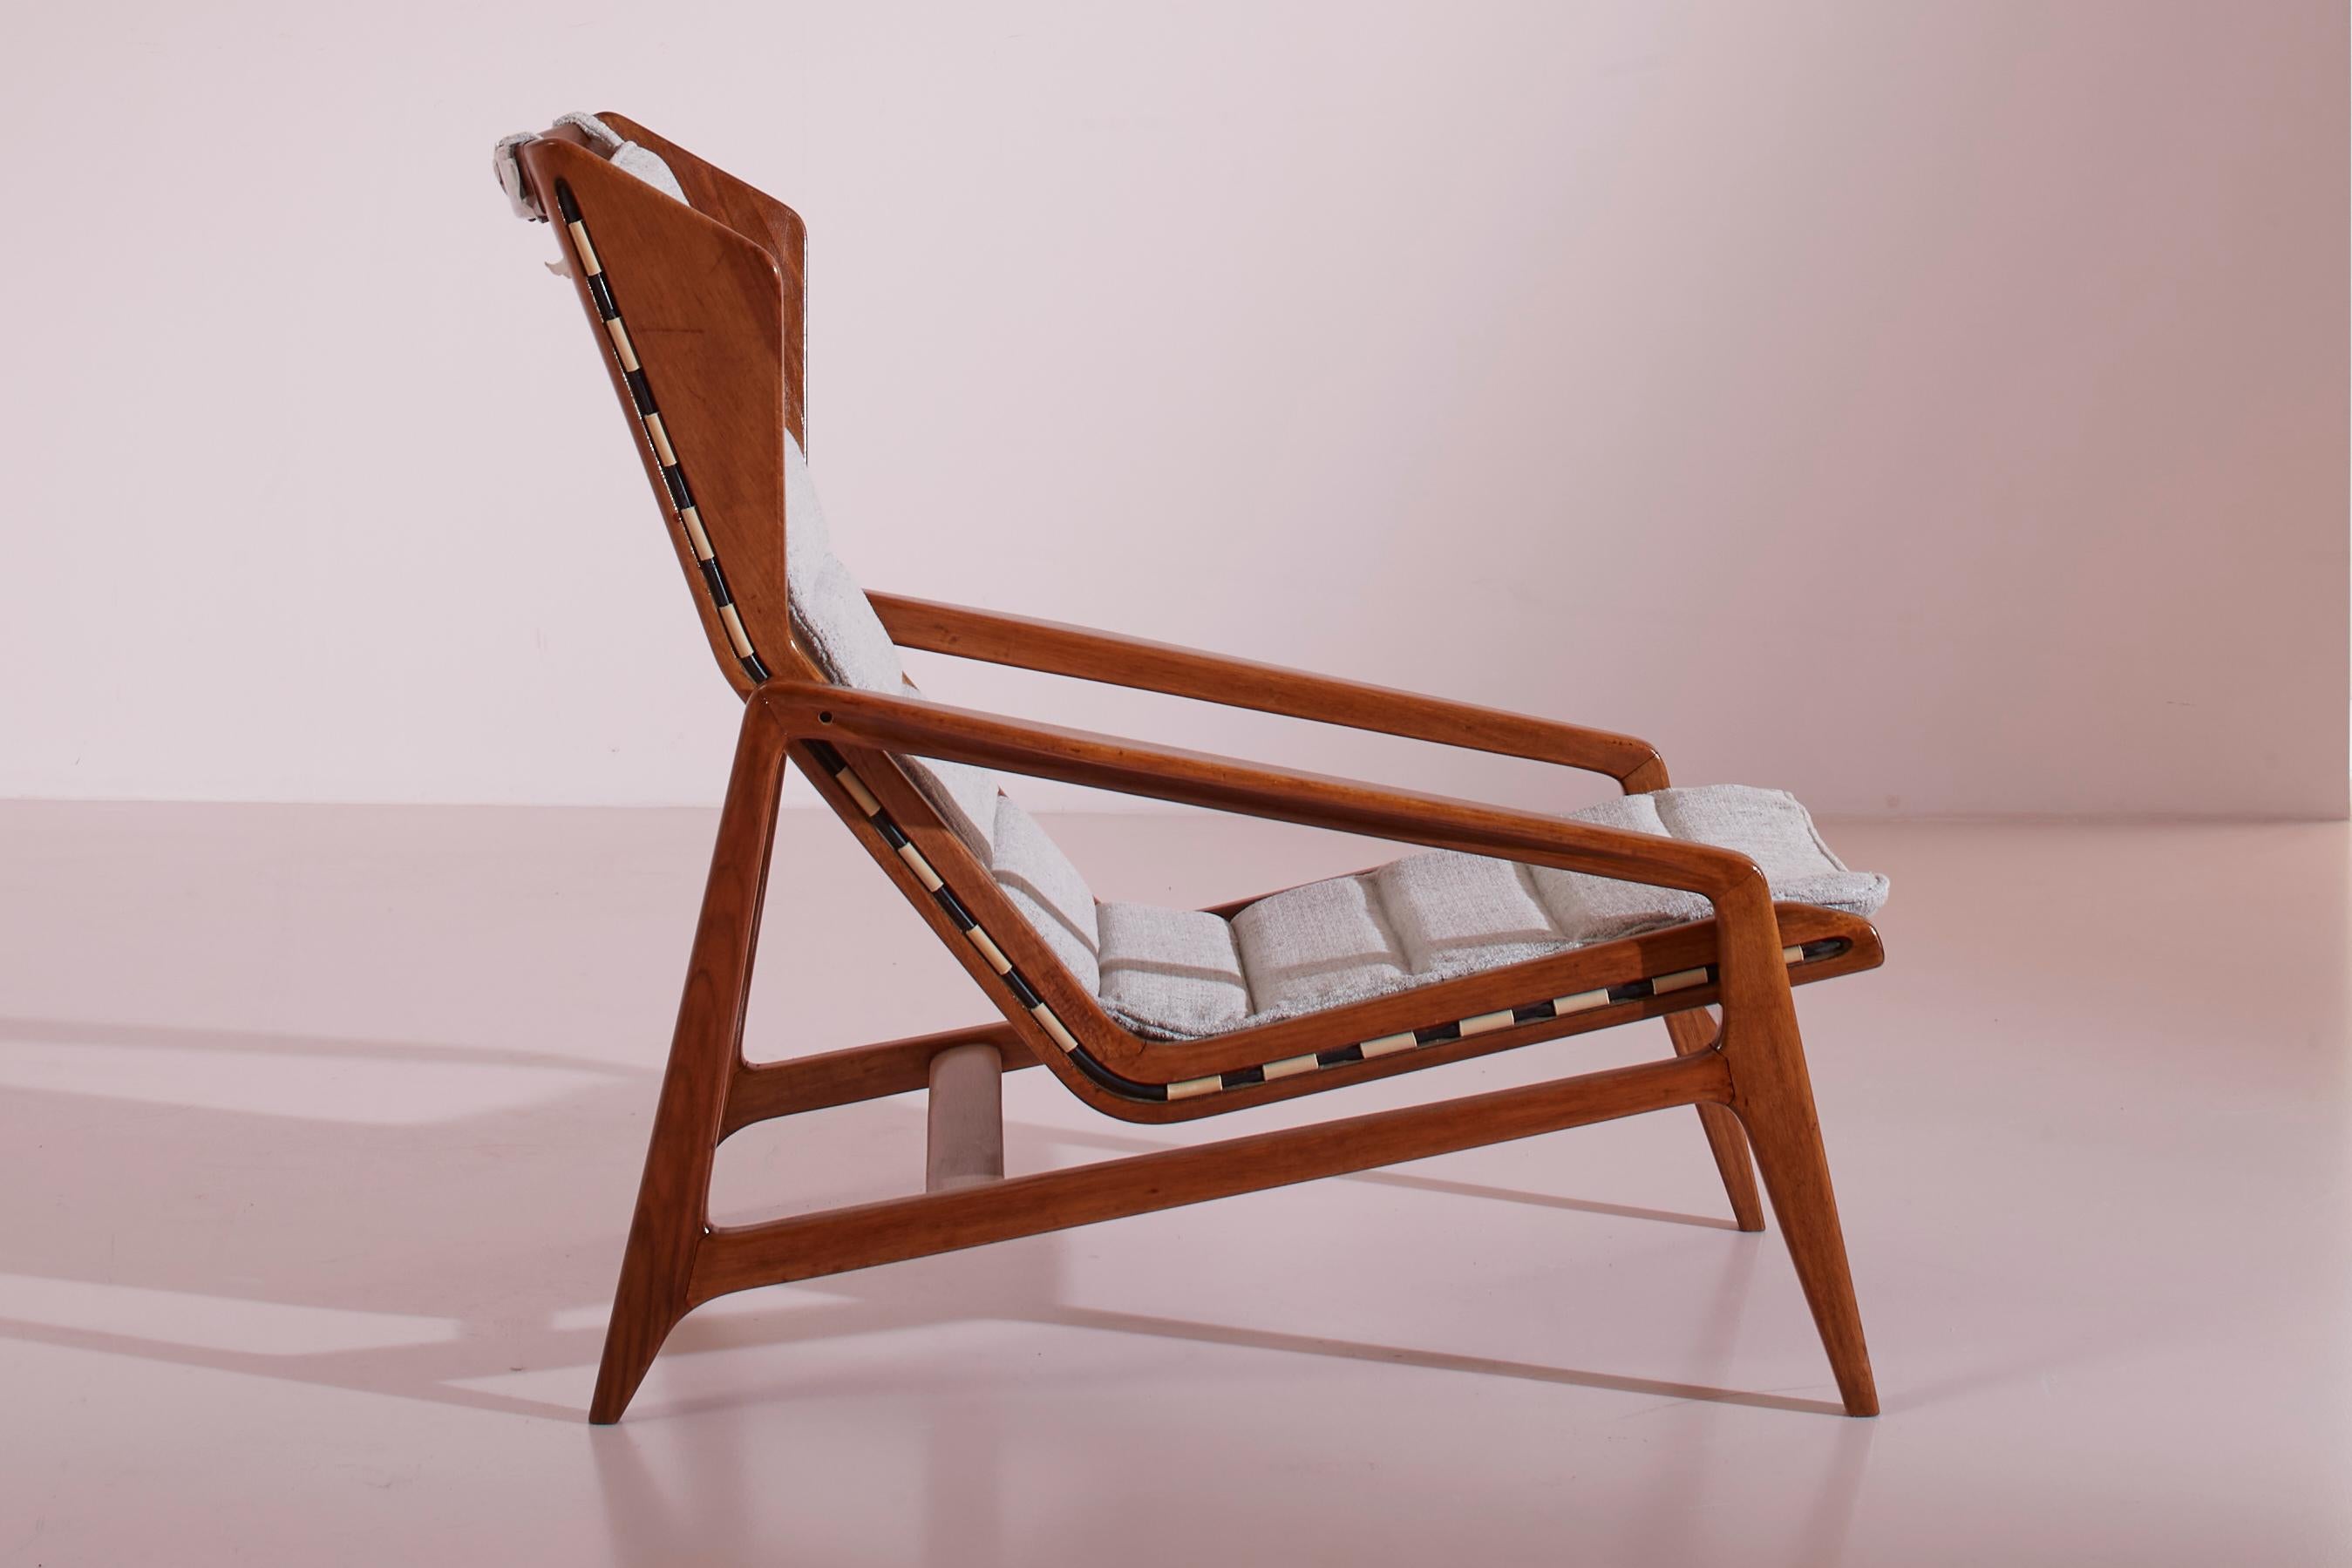 Gio Ponti Model 811 armchair made of walnut and rubber, Cassina, Italy, 1957 For Sale 4